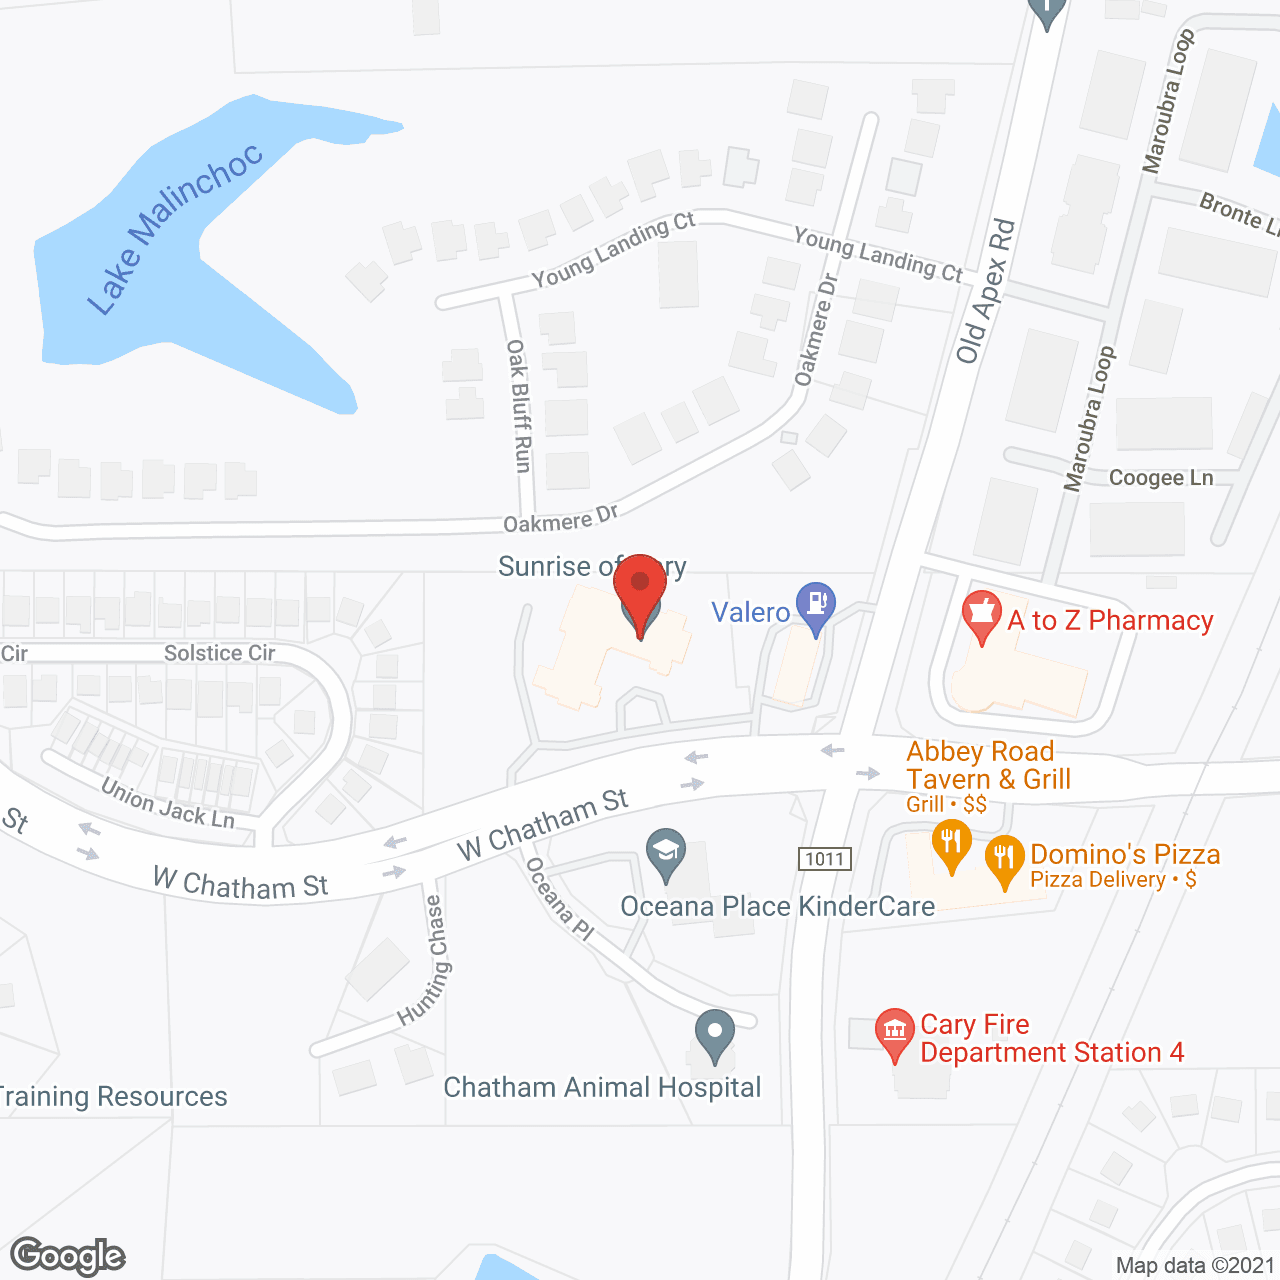 Sunrise of Cary in google map